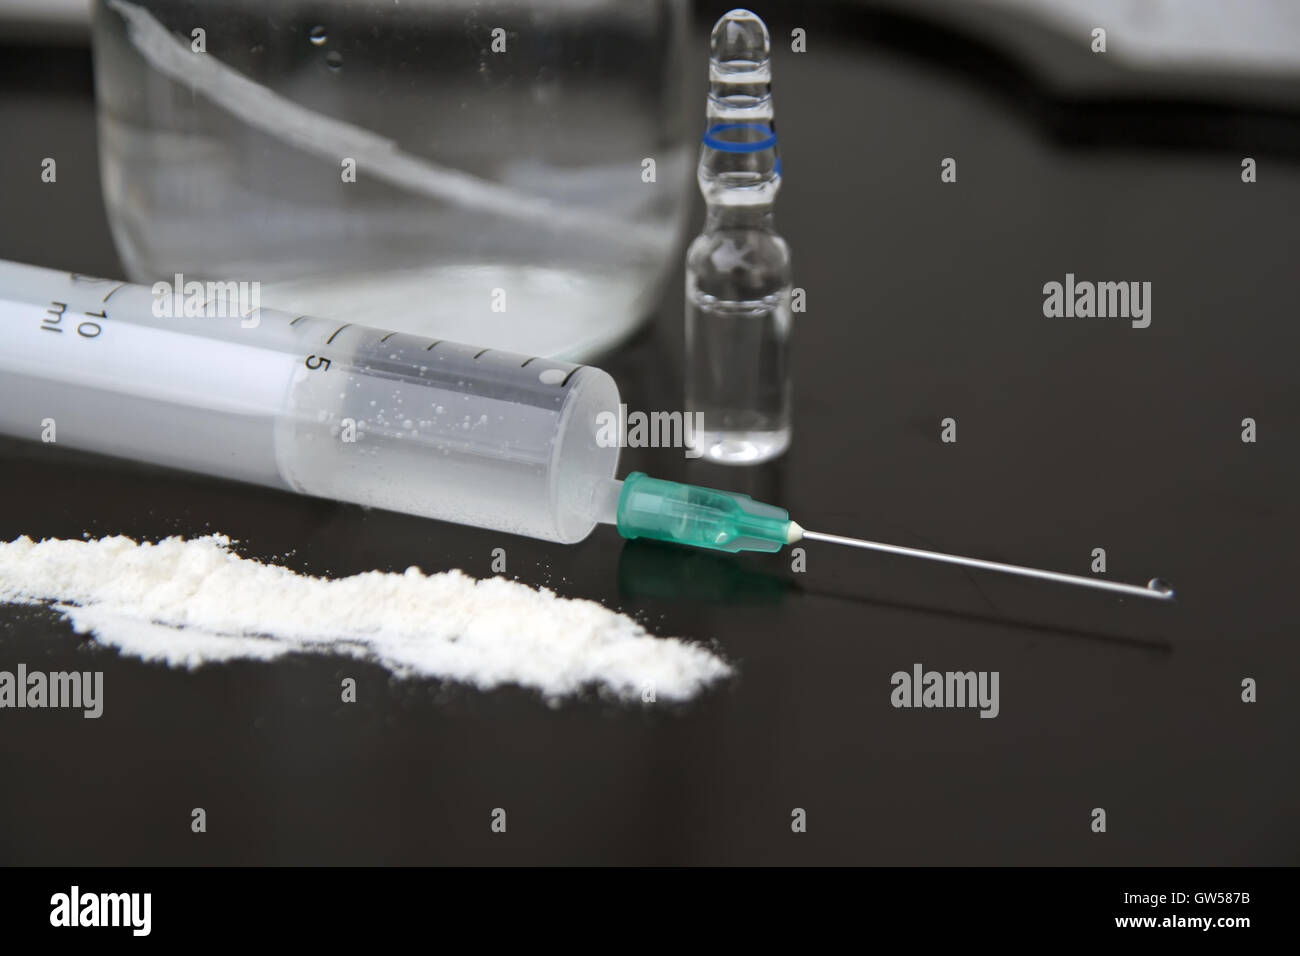 Medical syringe and narcotics. Intravenous application of drugs. Stock Photo